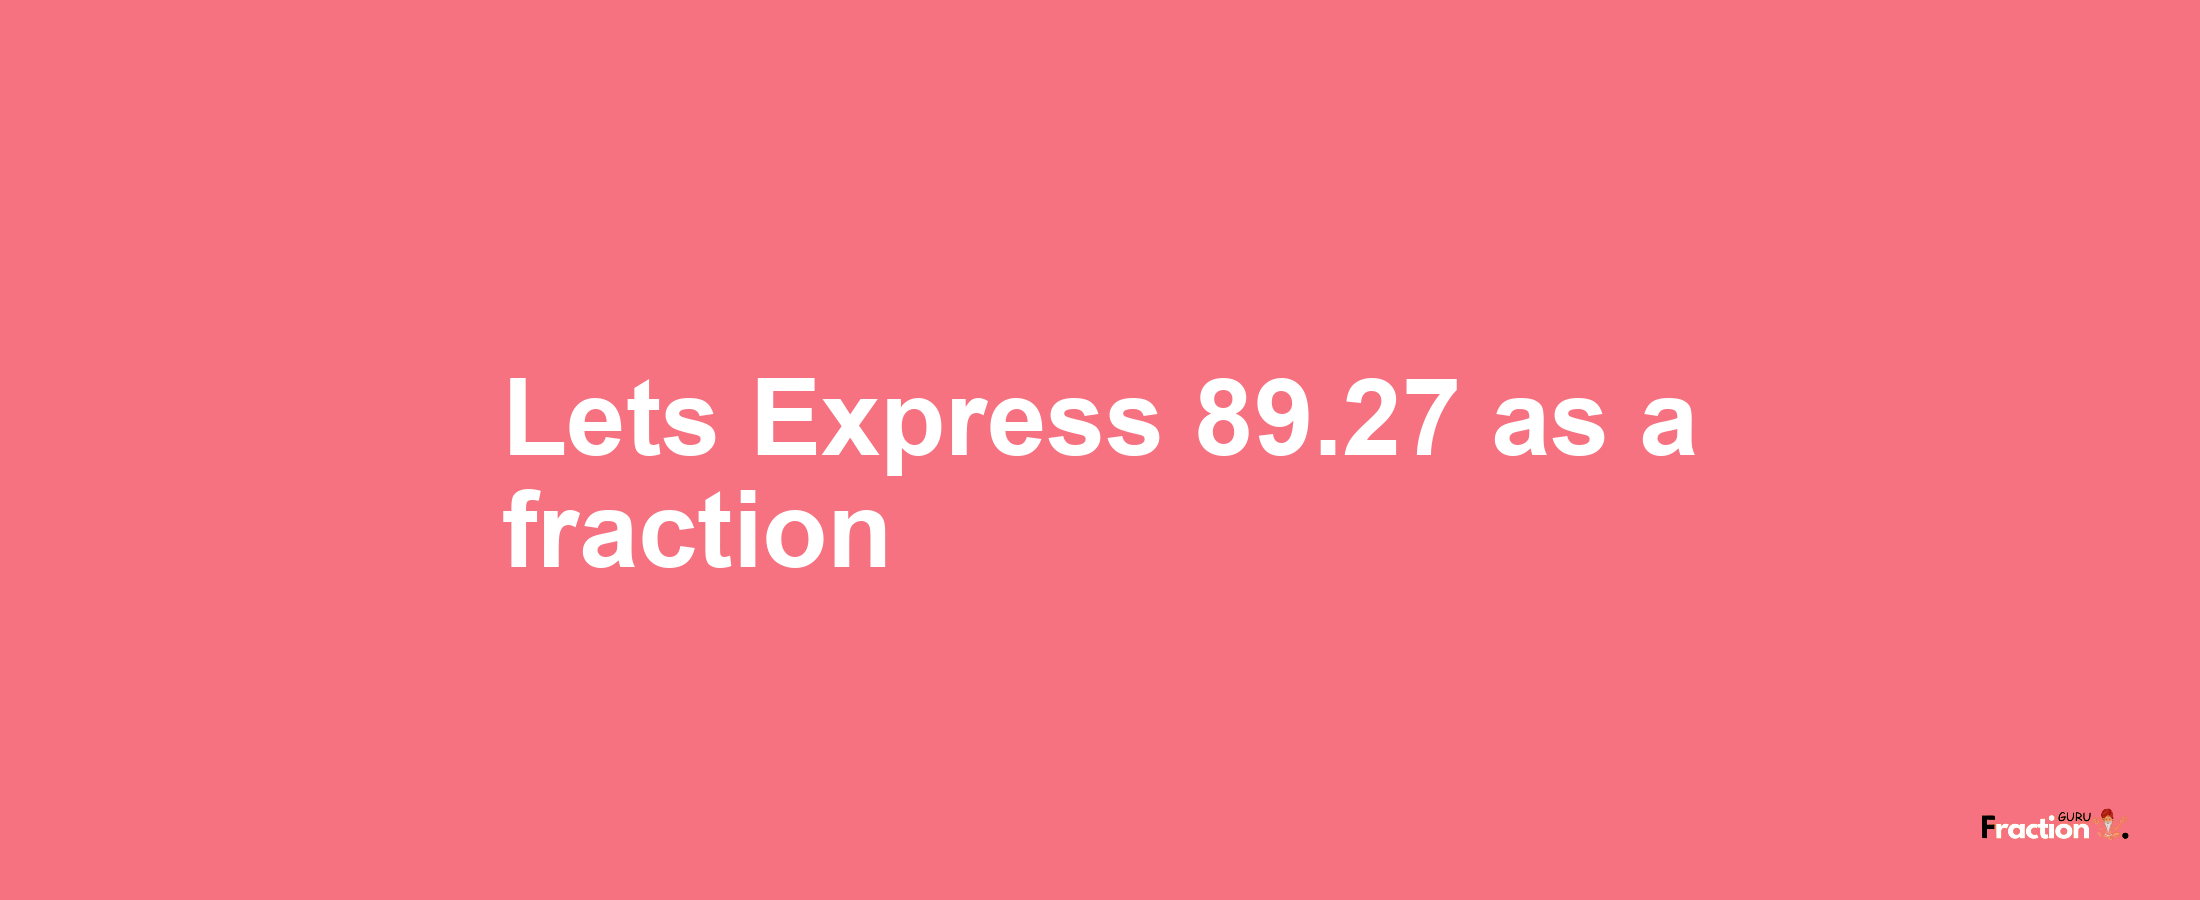 Lets Express 89.27 as afraction